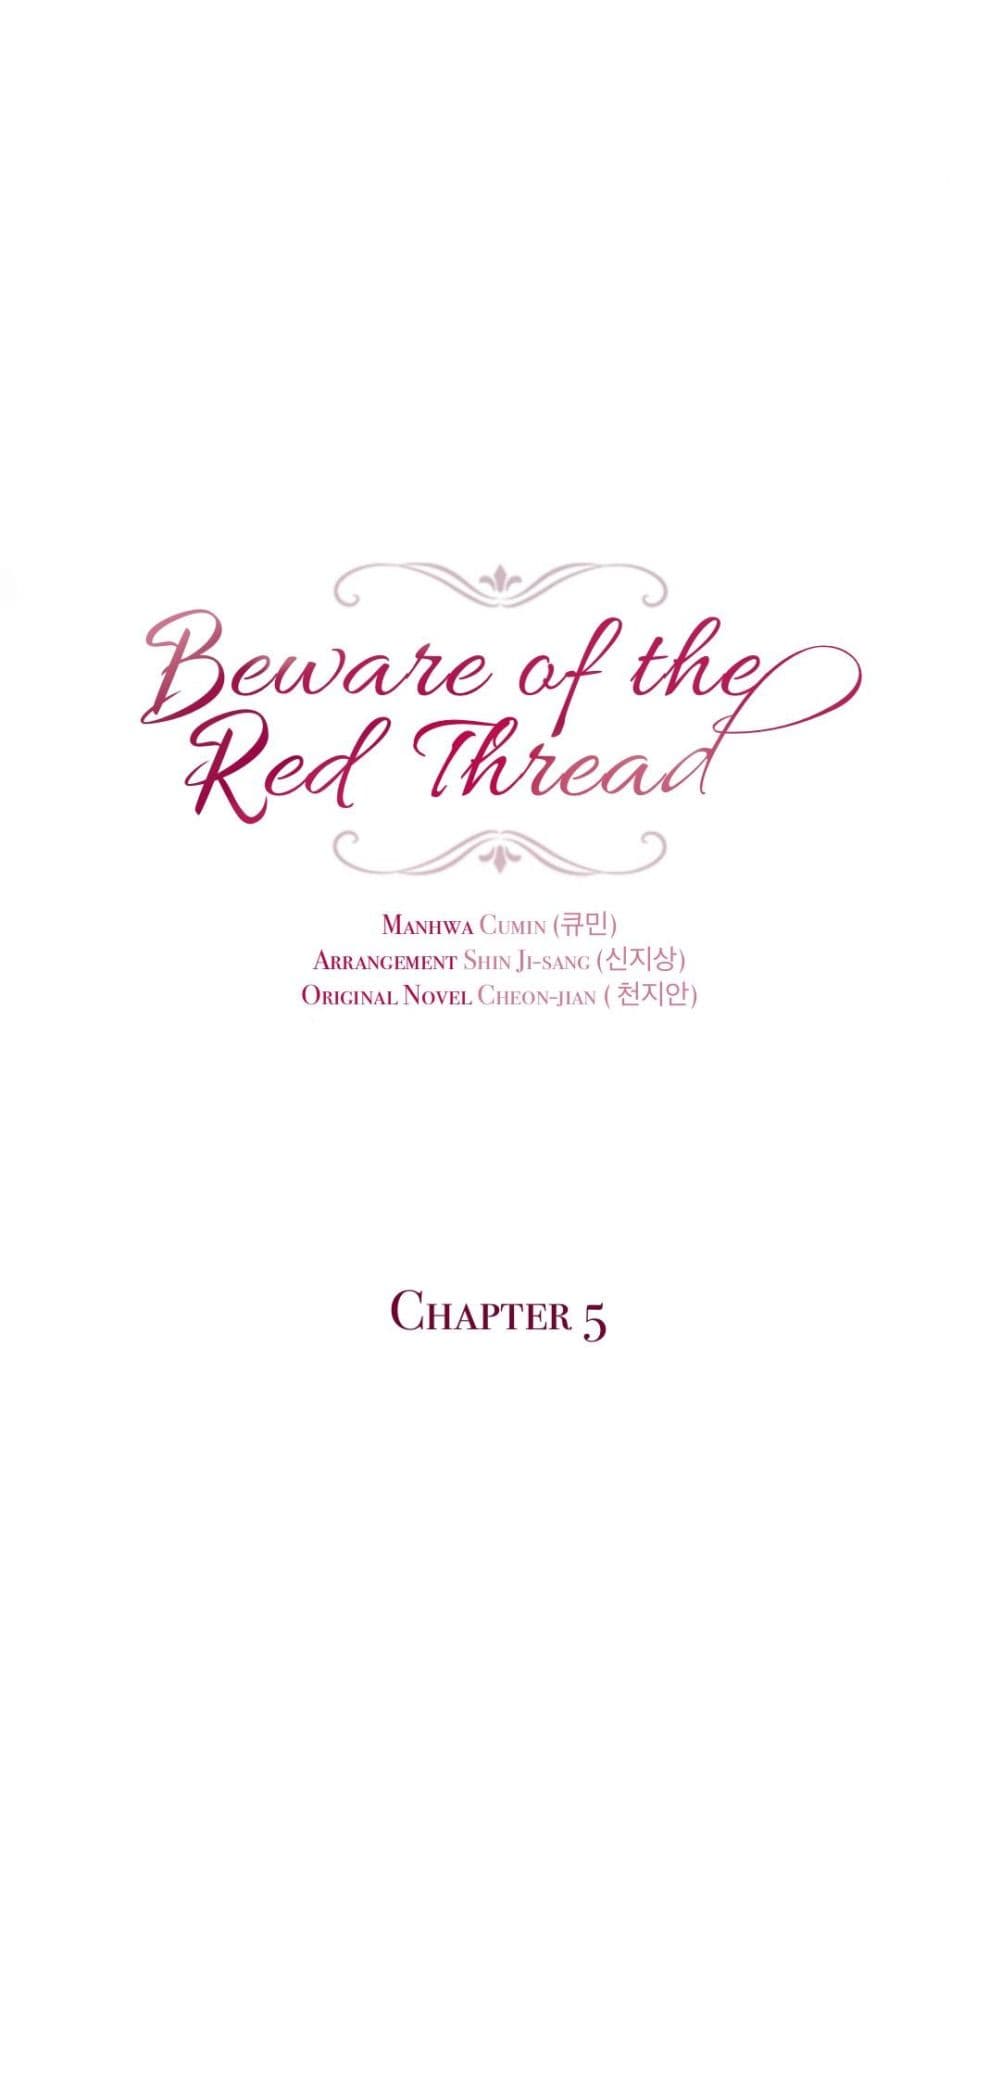 Beware of the Red Thread5 02